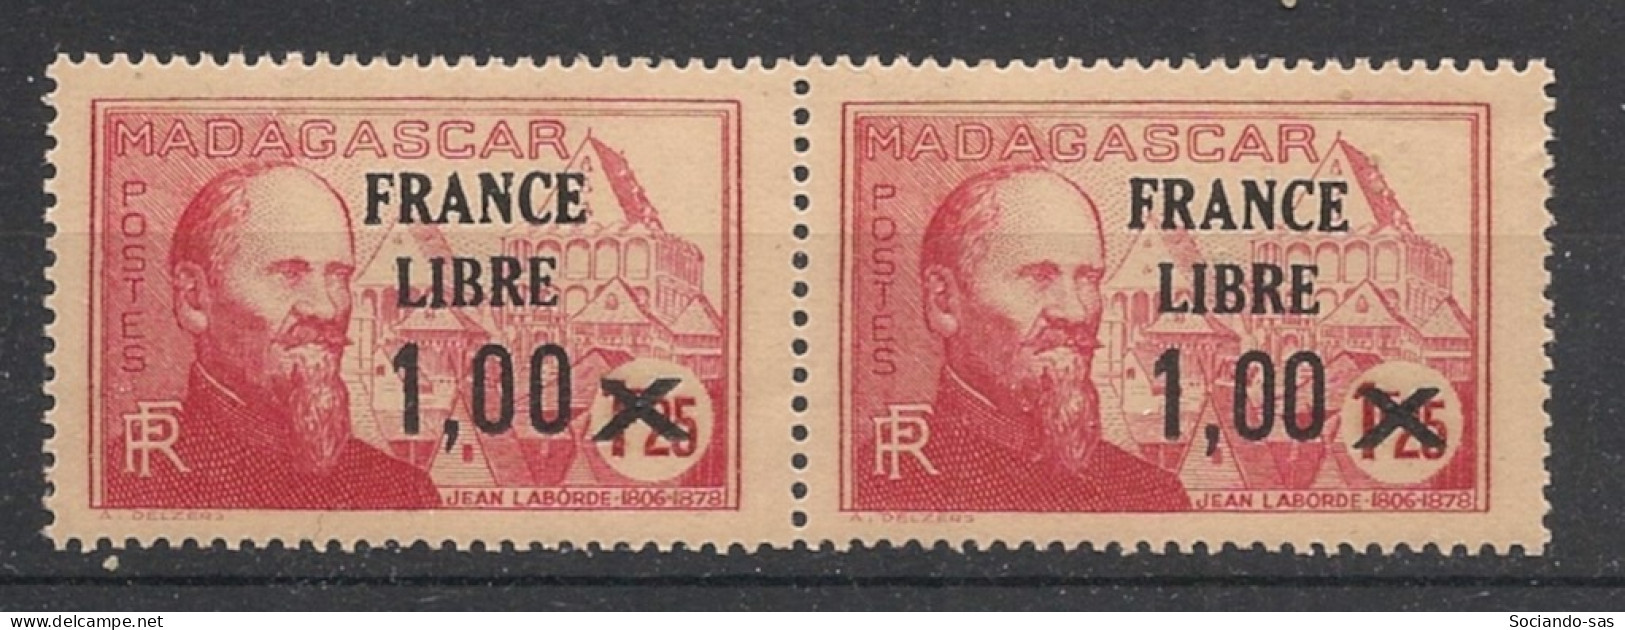 MADAGASCAR - 1942 - N°YT. 260b - France Libre 1,00 Sur 1f25 - VARIETE Surcharge Espacée T.a.n. - Neuf Luxe ** / MNH - Unused Stamps